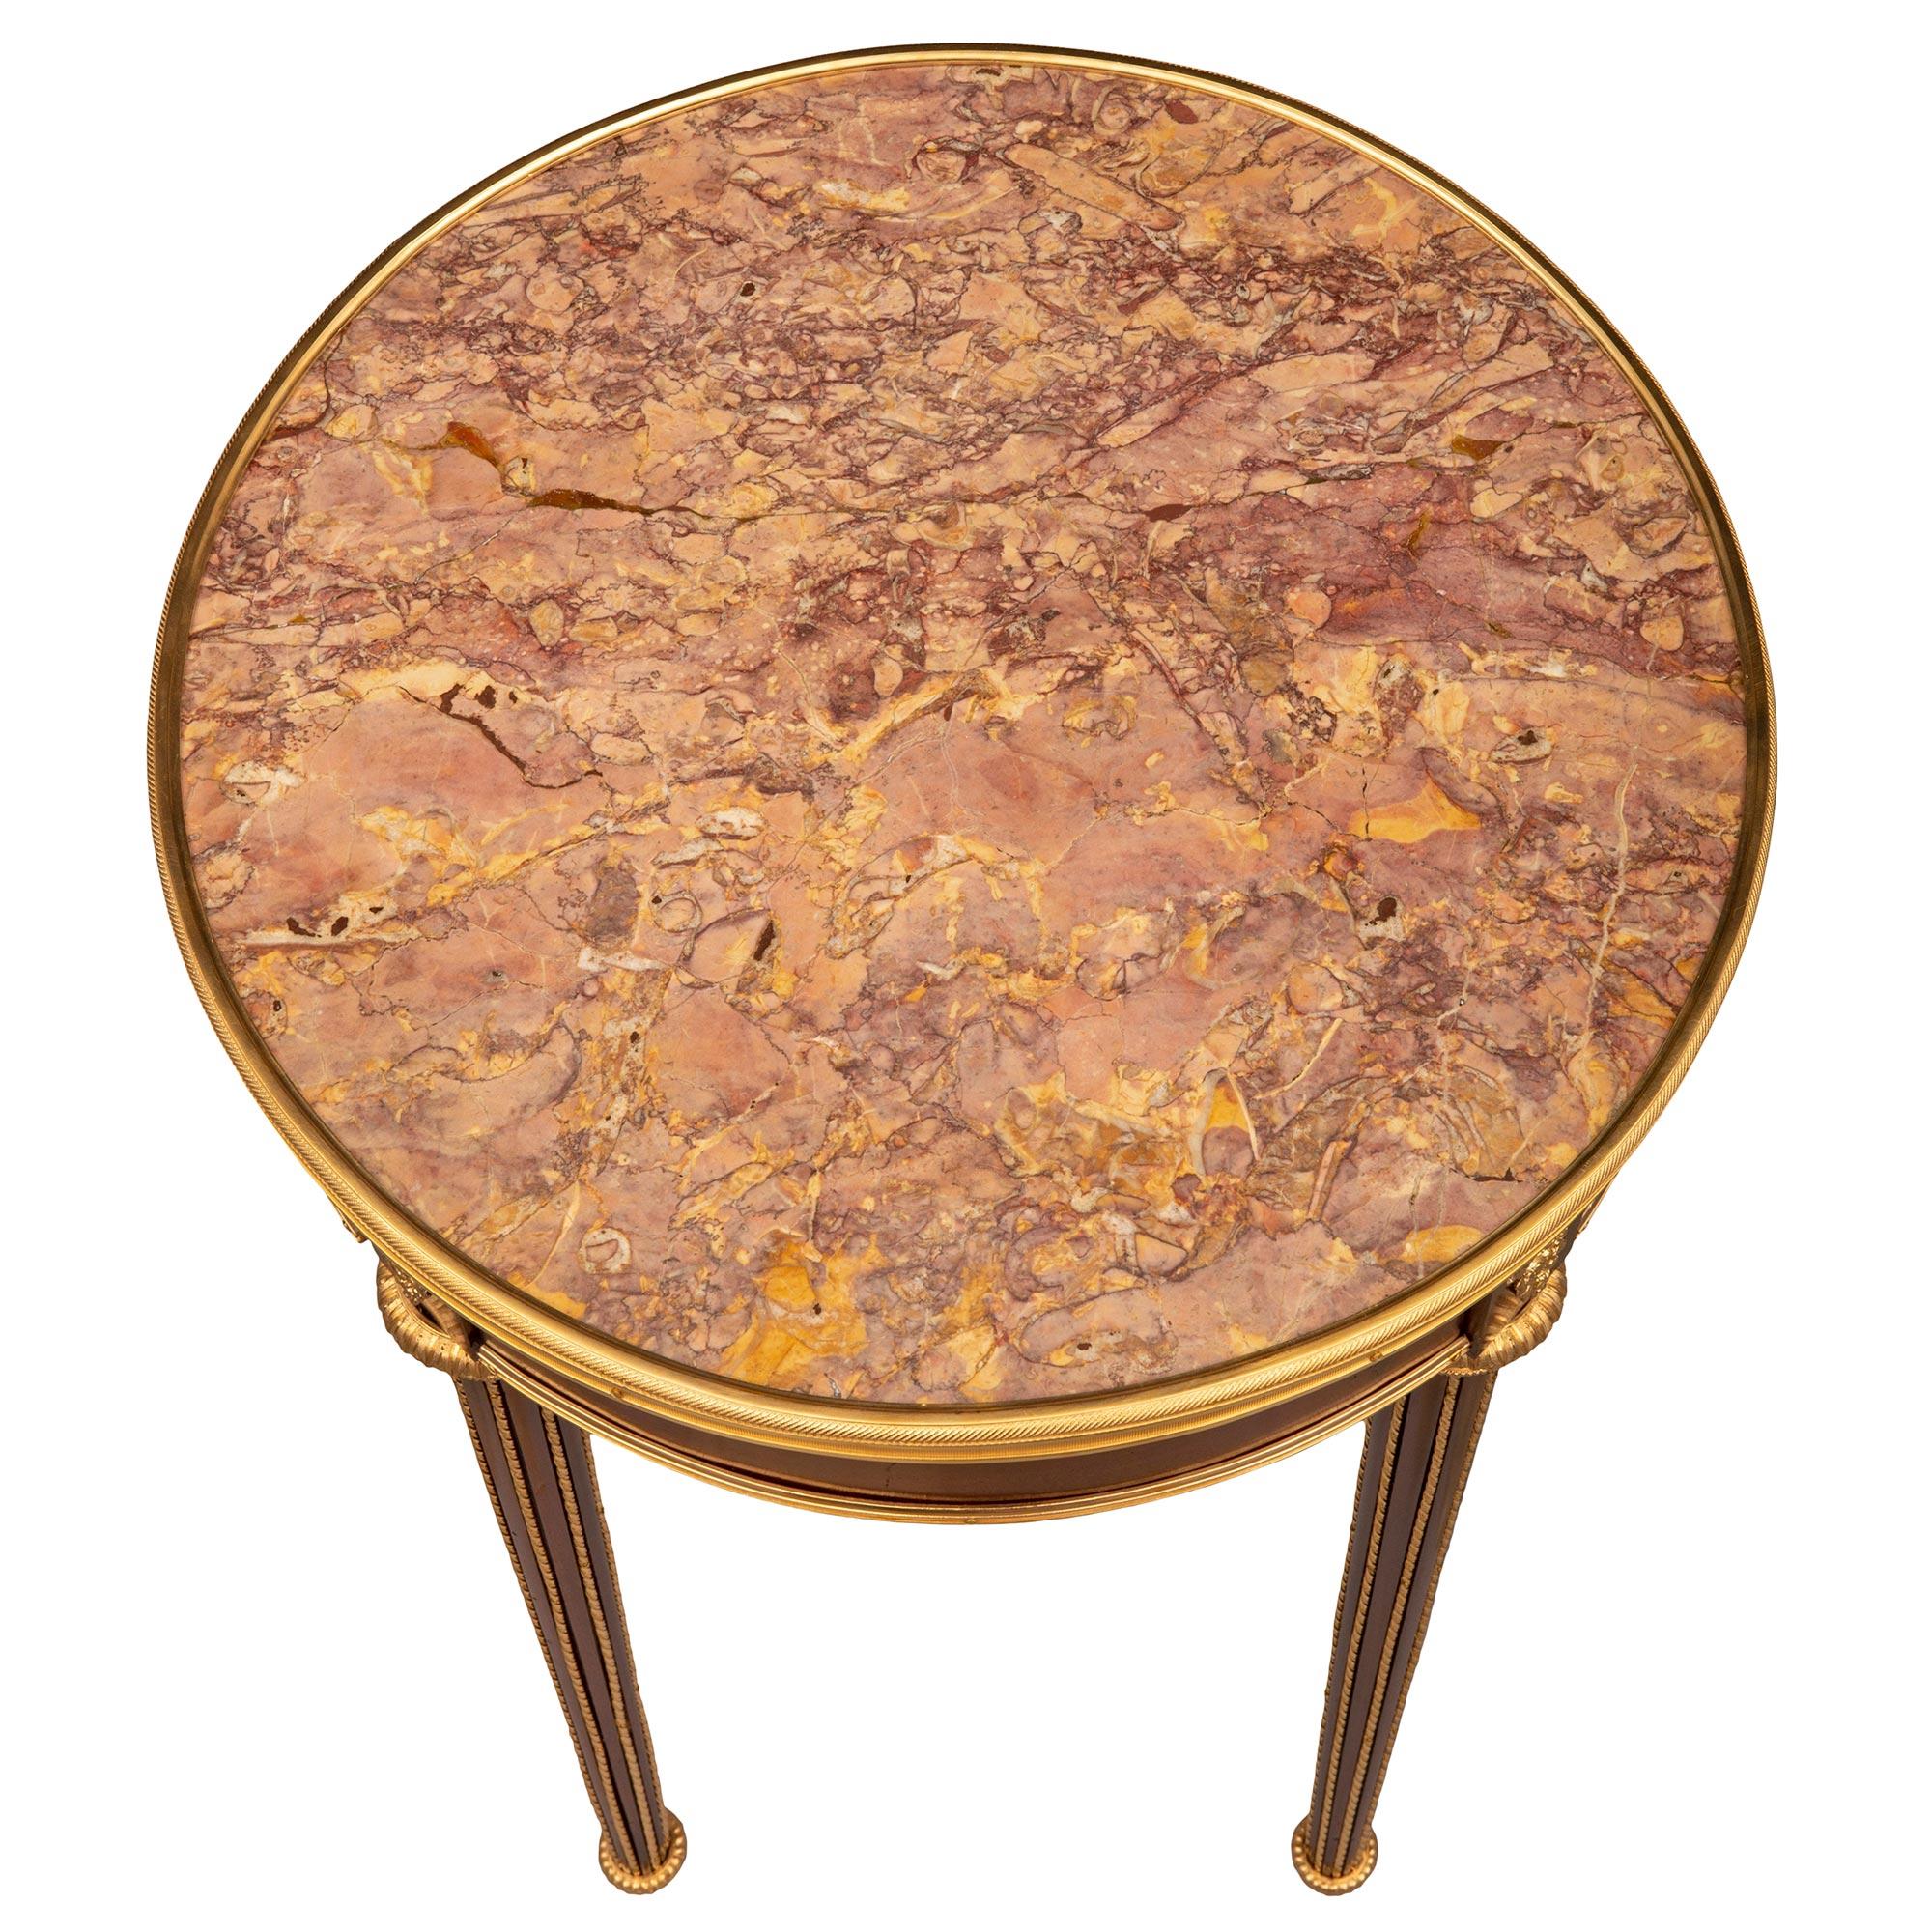 A remarkable and very high quality French 19th century Louis XVI st. Mahogany, ormolu, and Brocatelle Violette marble circular side table. The circular table is raised by elegant circular tapered legs with fine topie shaped feet and unique and